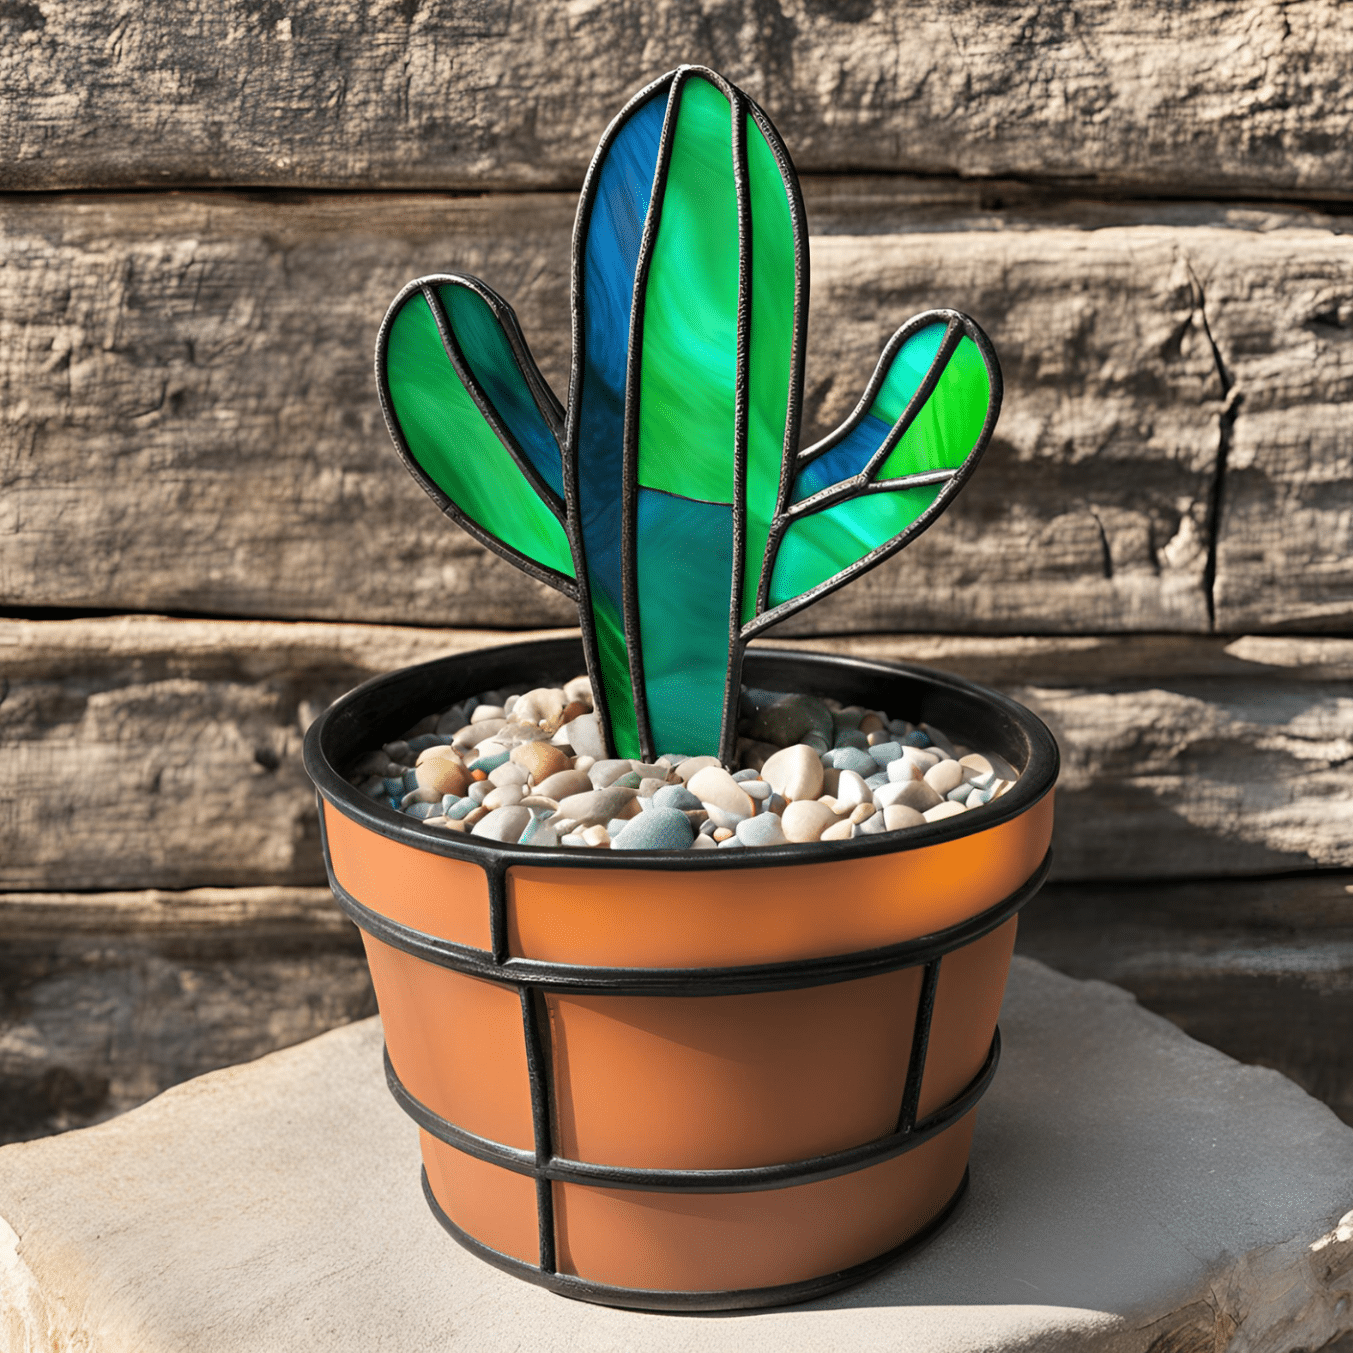 A stained glass piece in the shape of a cactus embedded in a plant pot